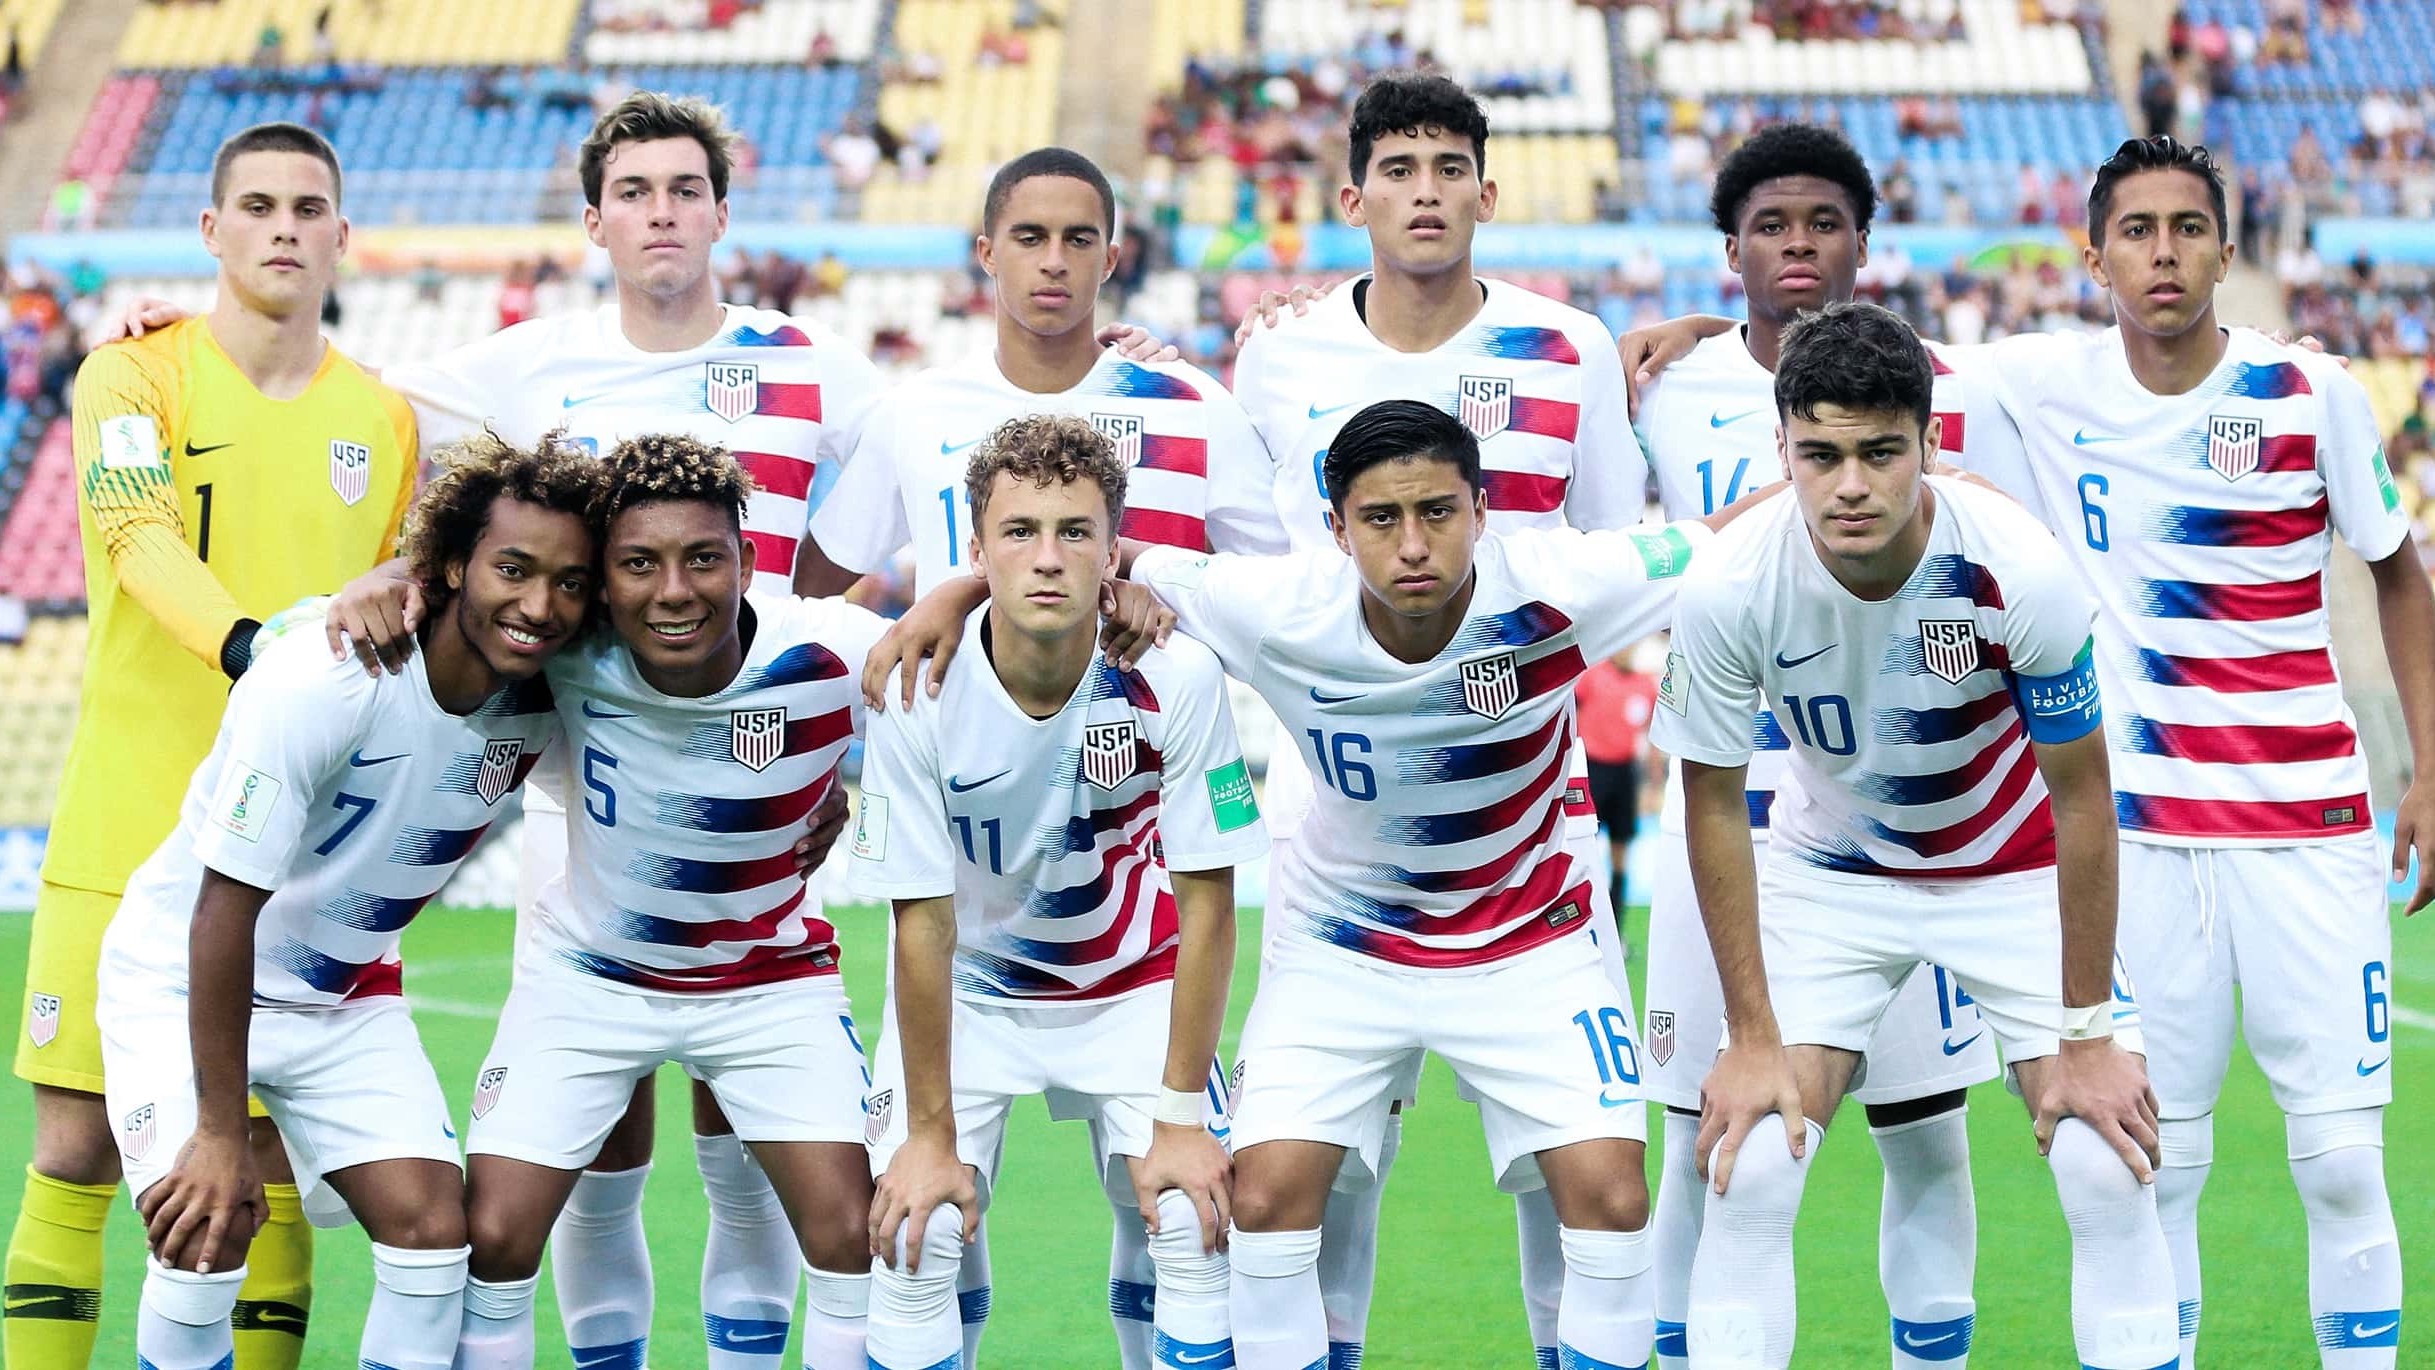 USA falls to Senegal 4-1 in opening group match at FIFA U-17 World Cup